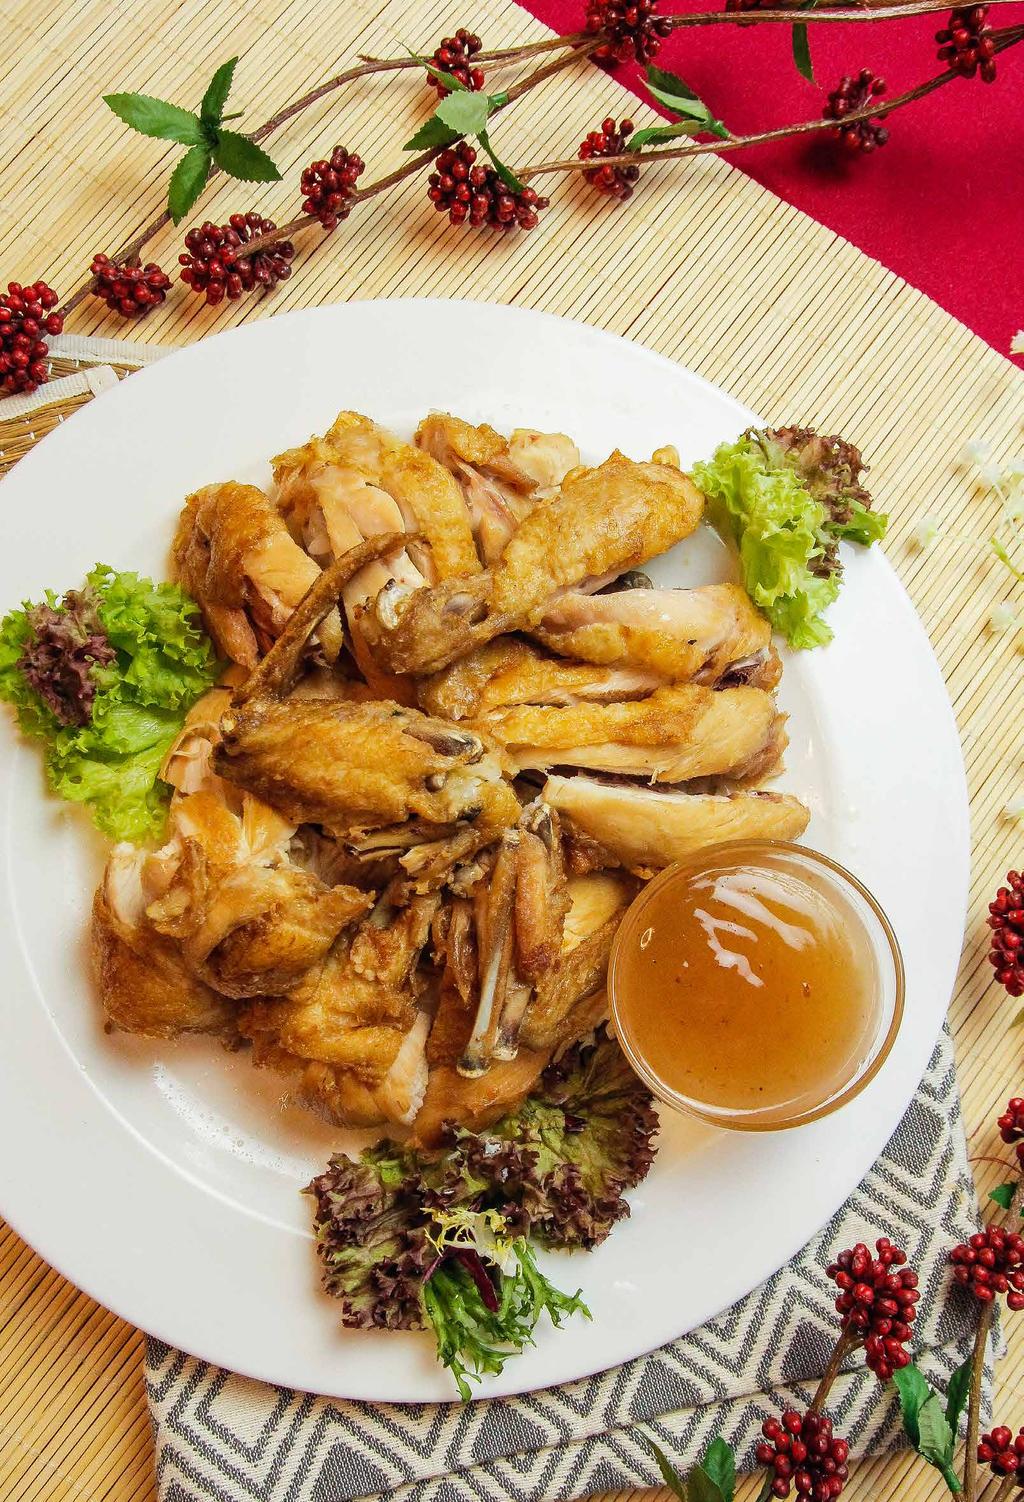 Chinese New Year Party Set Menu $288/ set ($308.16, incl. GST) Delivery fee is $30 ($32.10, incl. GST) or arrange for a free pick up from 5 Burn Road.